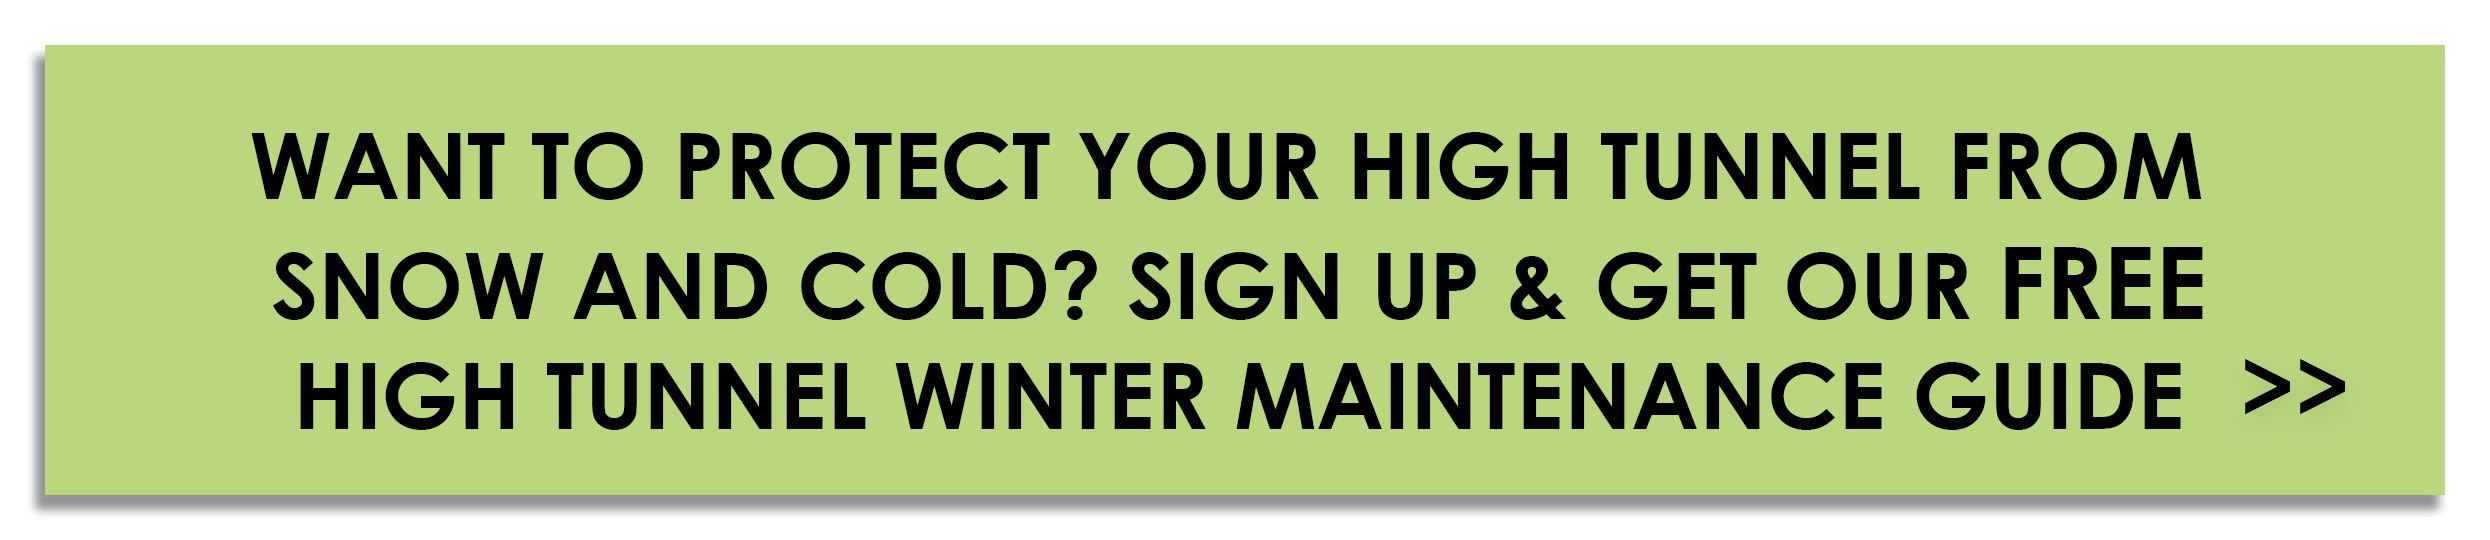 call-to-action-for-winter-maintenance-guide-2.jpg